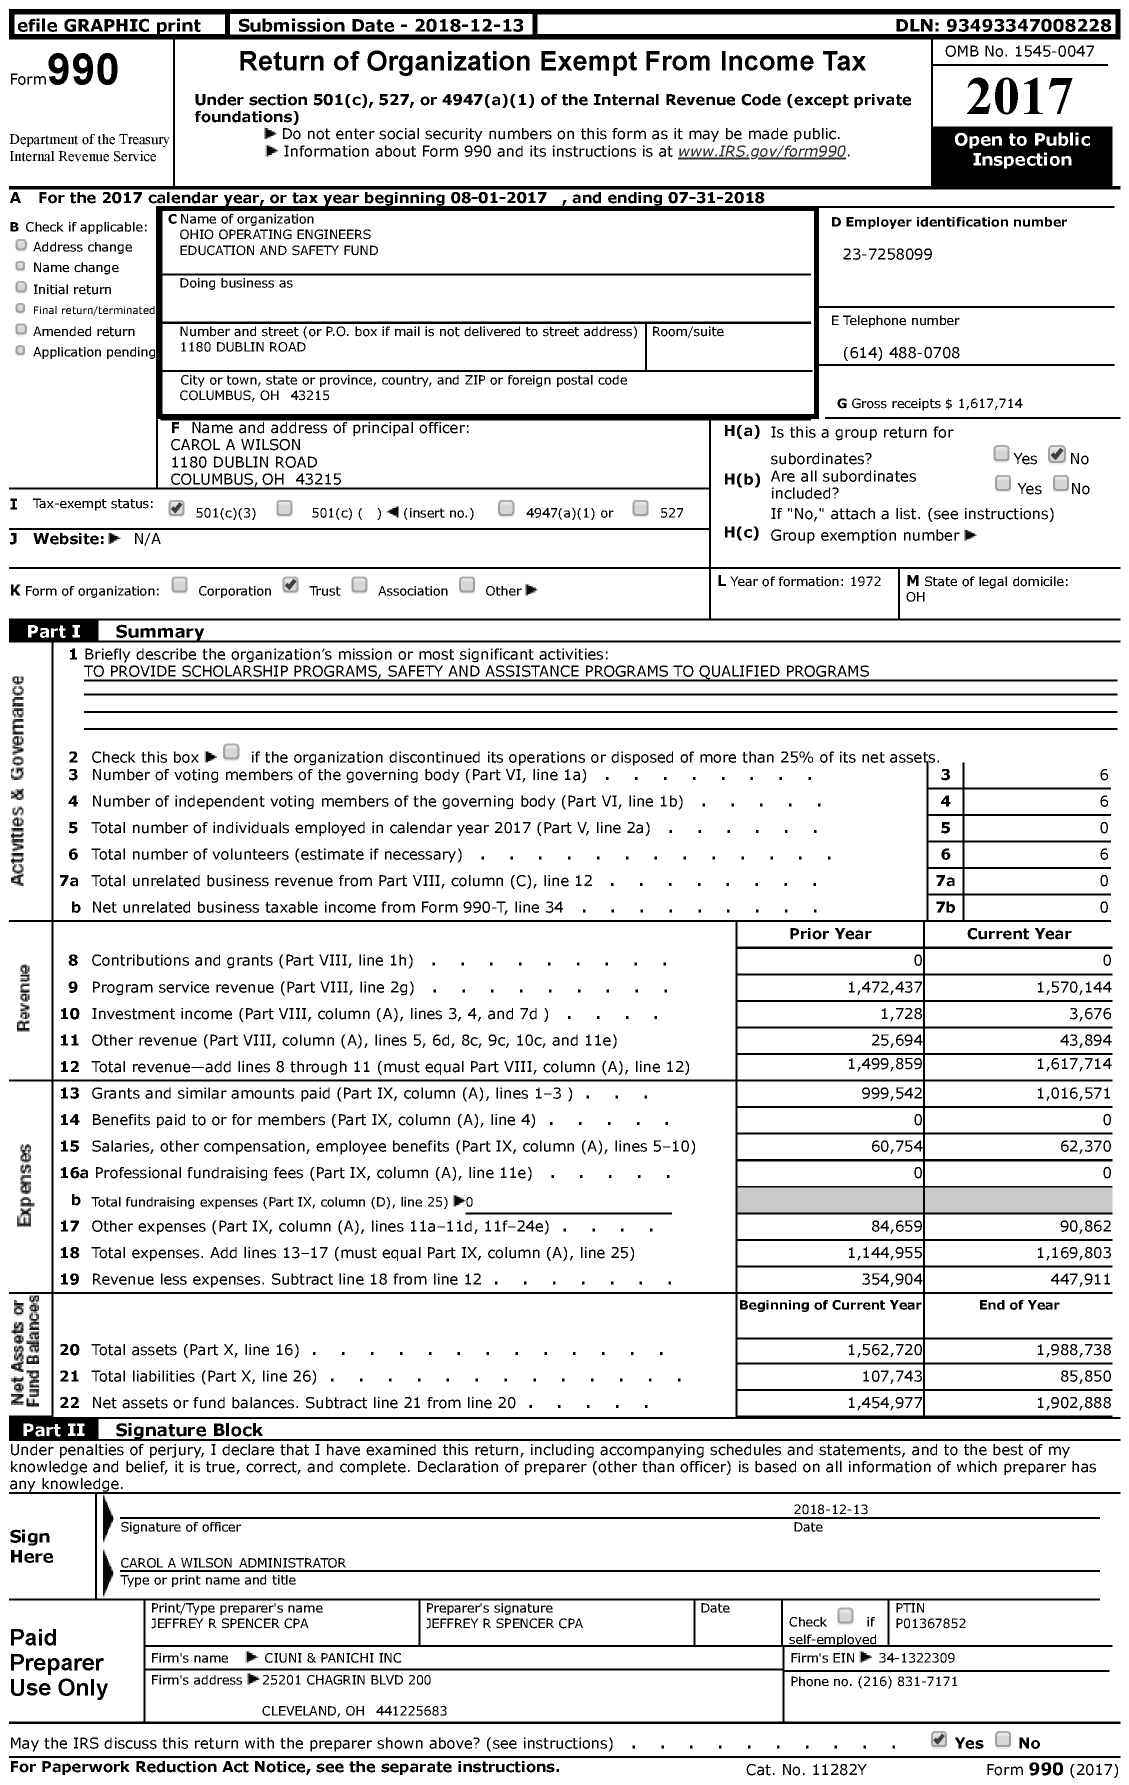 Image of first page of 2017 Form 990 for Ohio Operating Engineers Education and Safety Fund